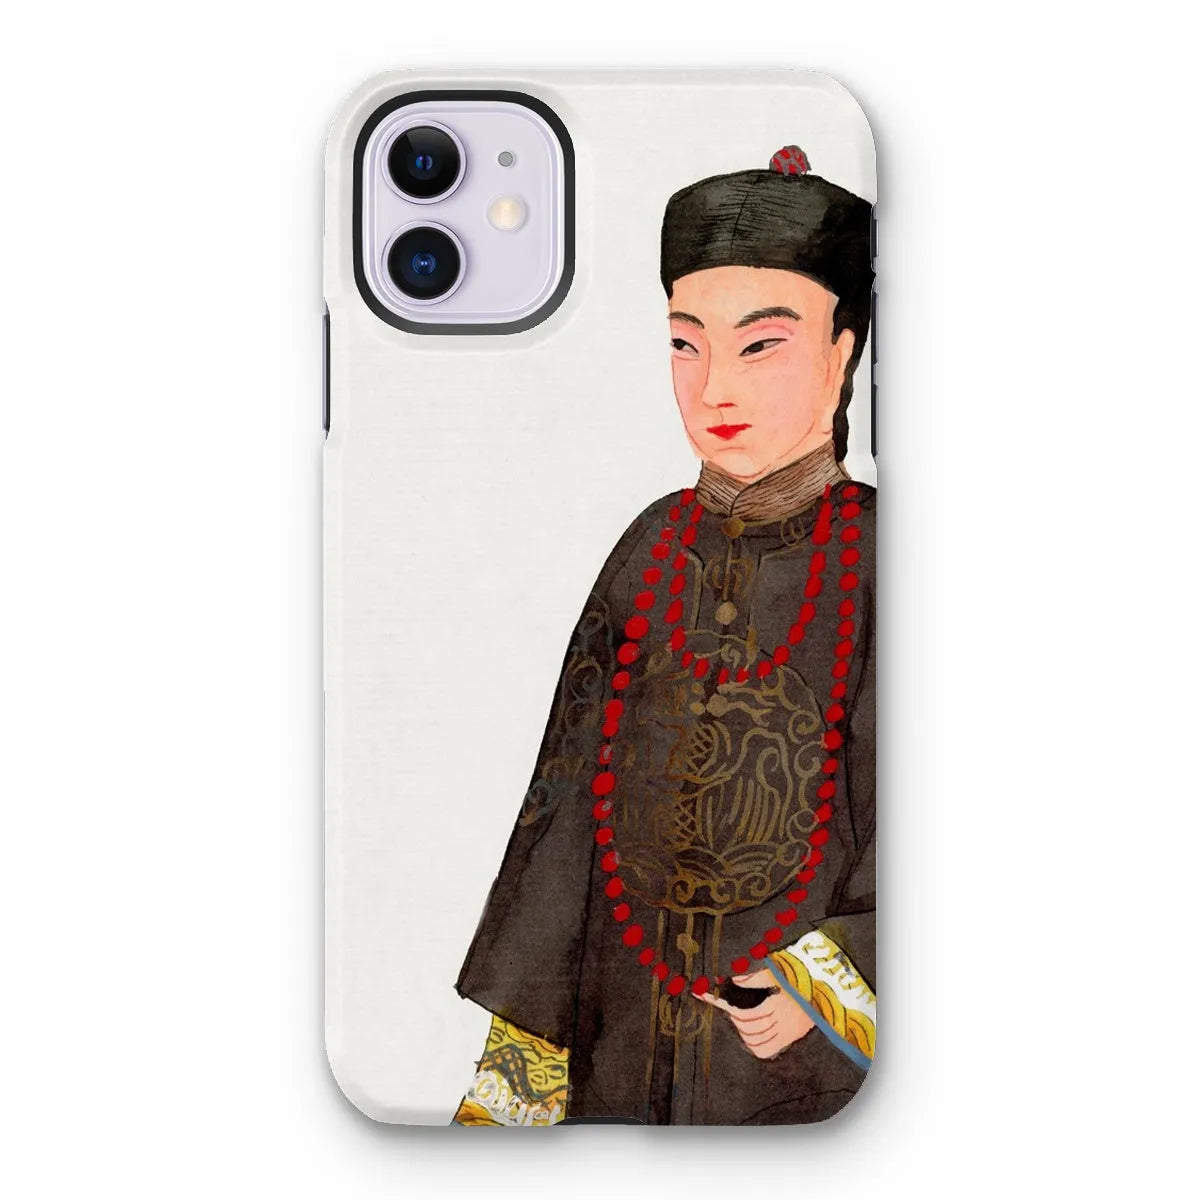 Emperor’s Courtier - Chinese Manchu Aesthetic Art Phone Case - Iphone 11 / Matte - Mobile Phone Cases - Aesthetic Art